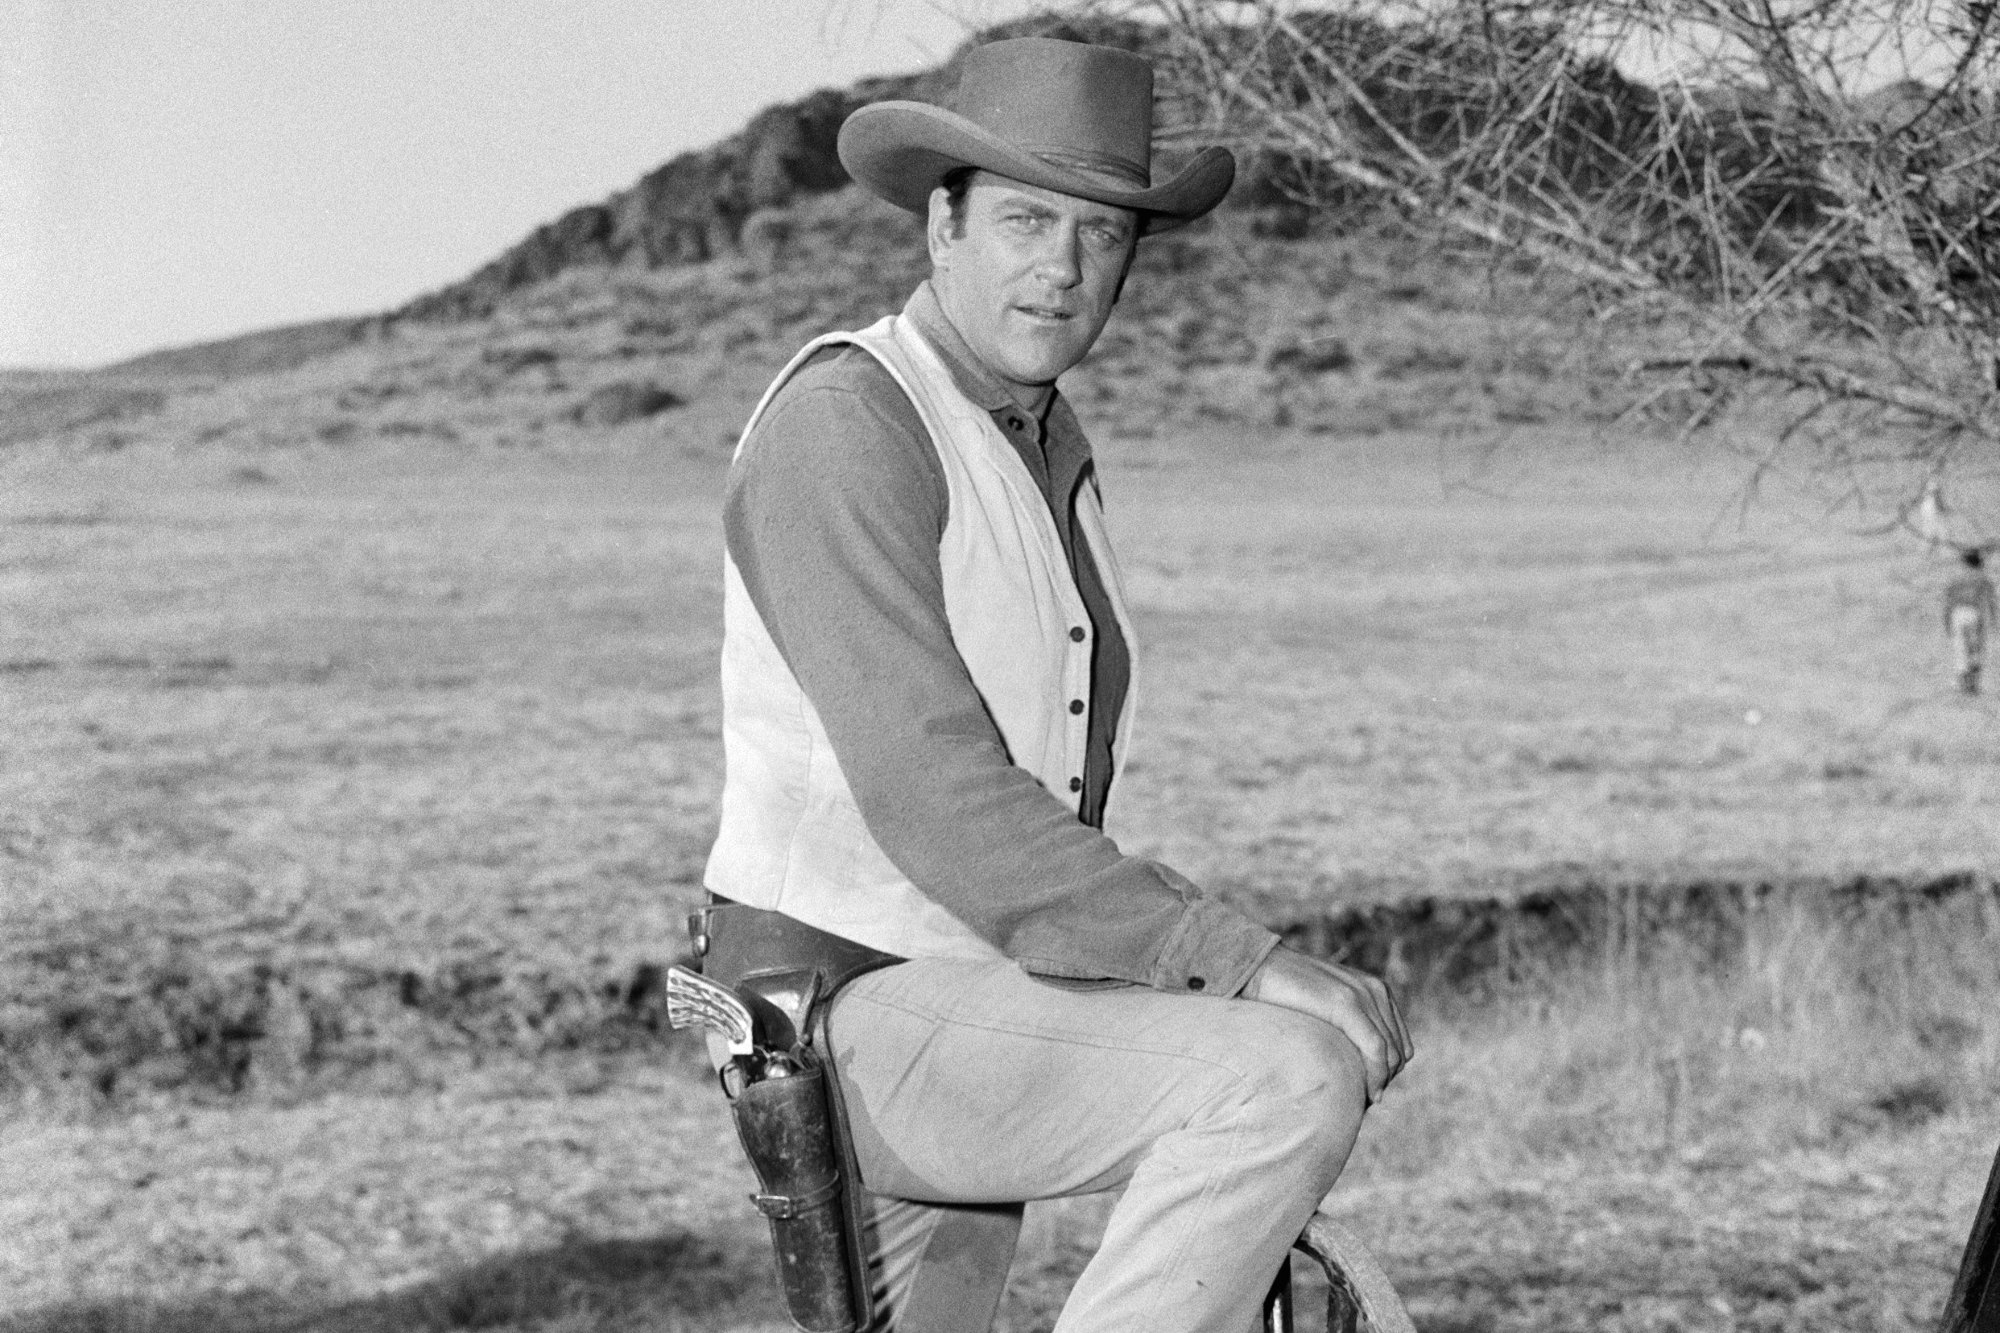 'Gunsmoke' actor James Arness as Marshal Matt Dillon in a black-and-white photograph in Western clothes with his foot resting on a carriage wheel.